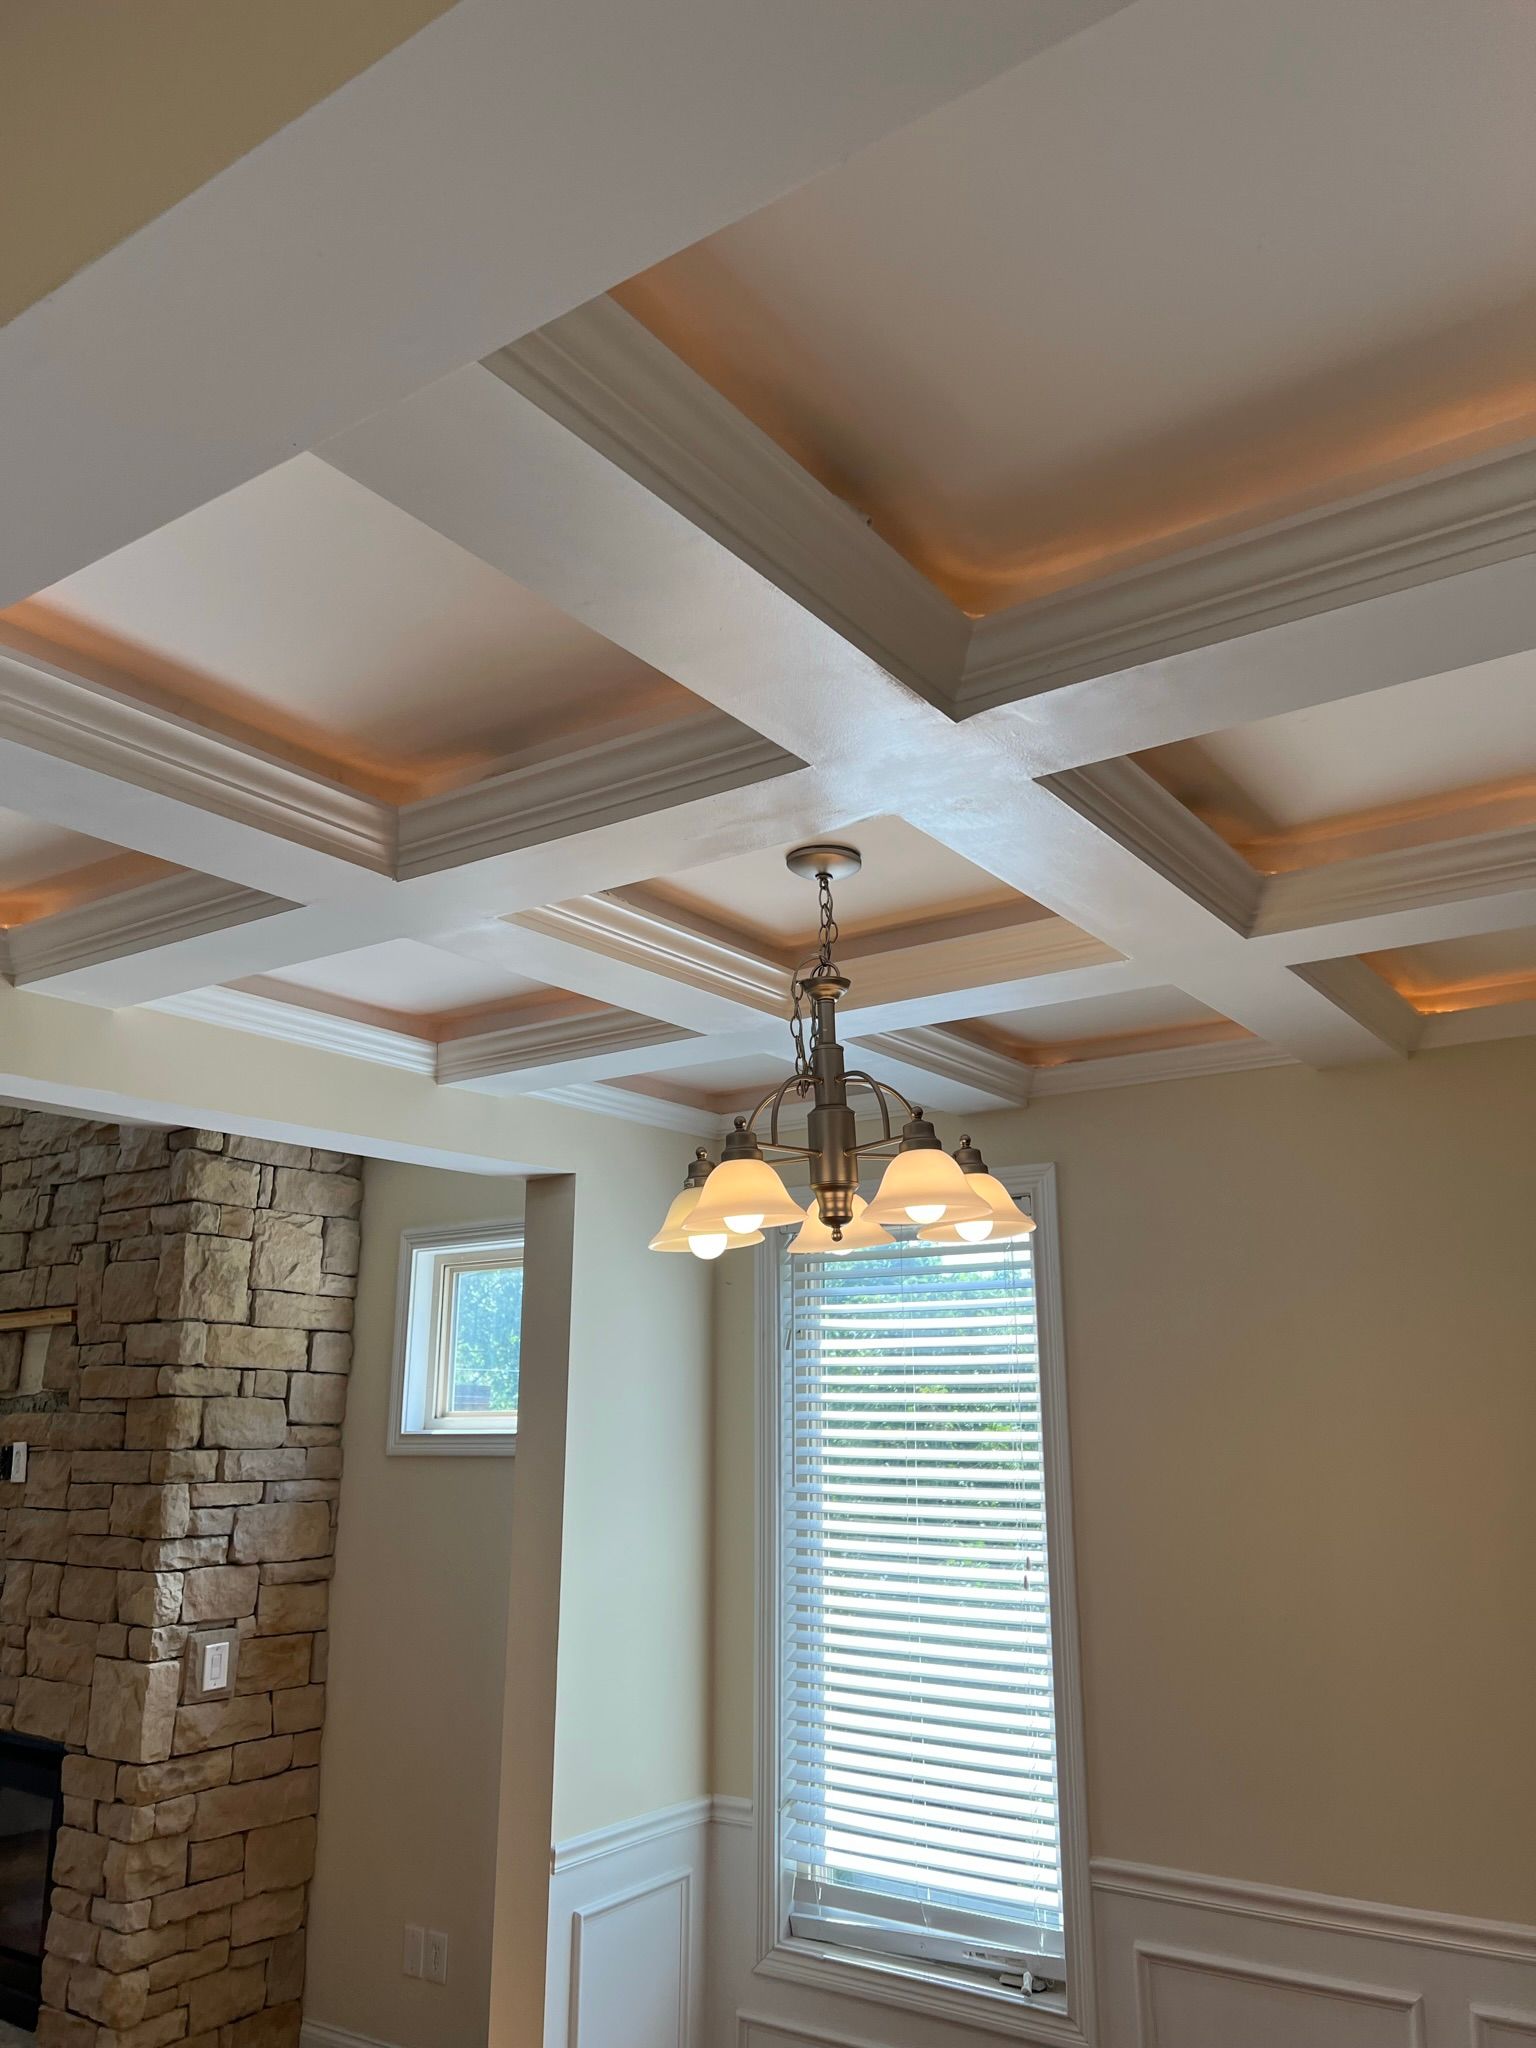 Crescent Avenue Townhomes - Living room celling